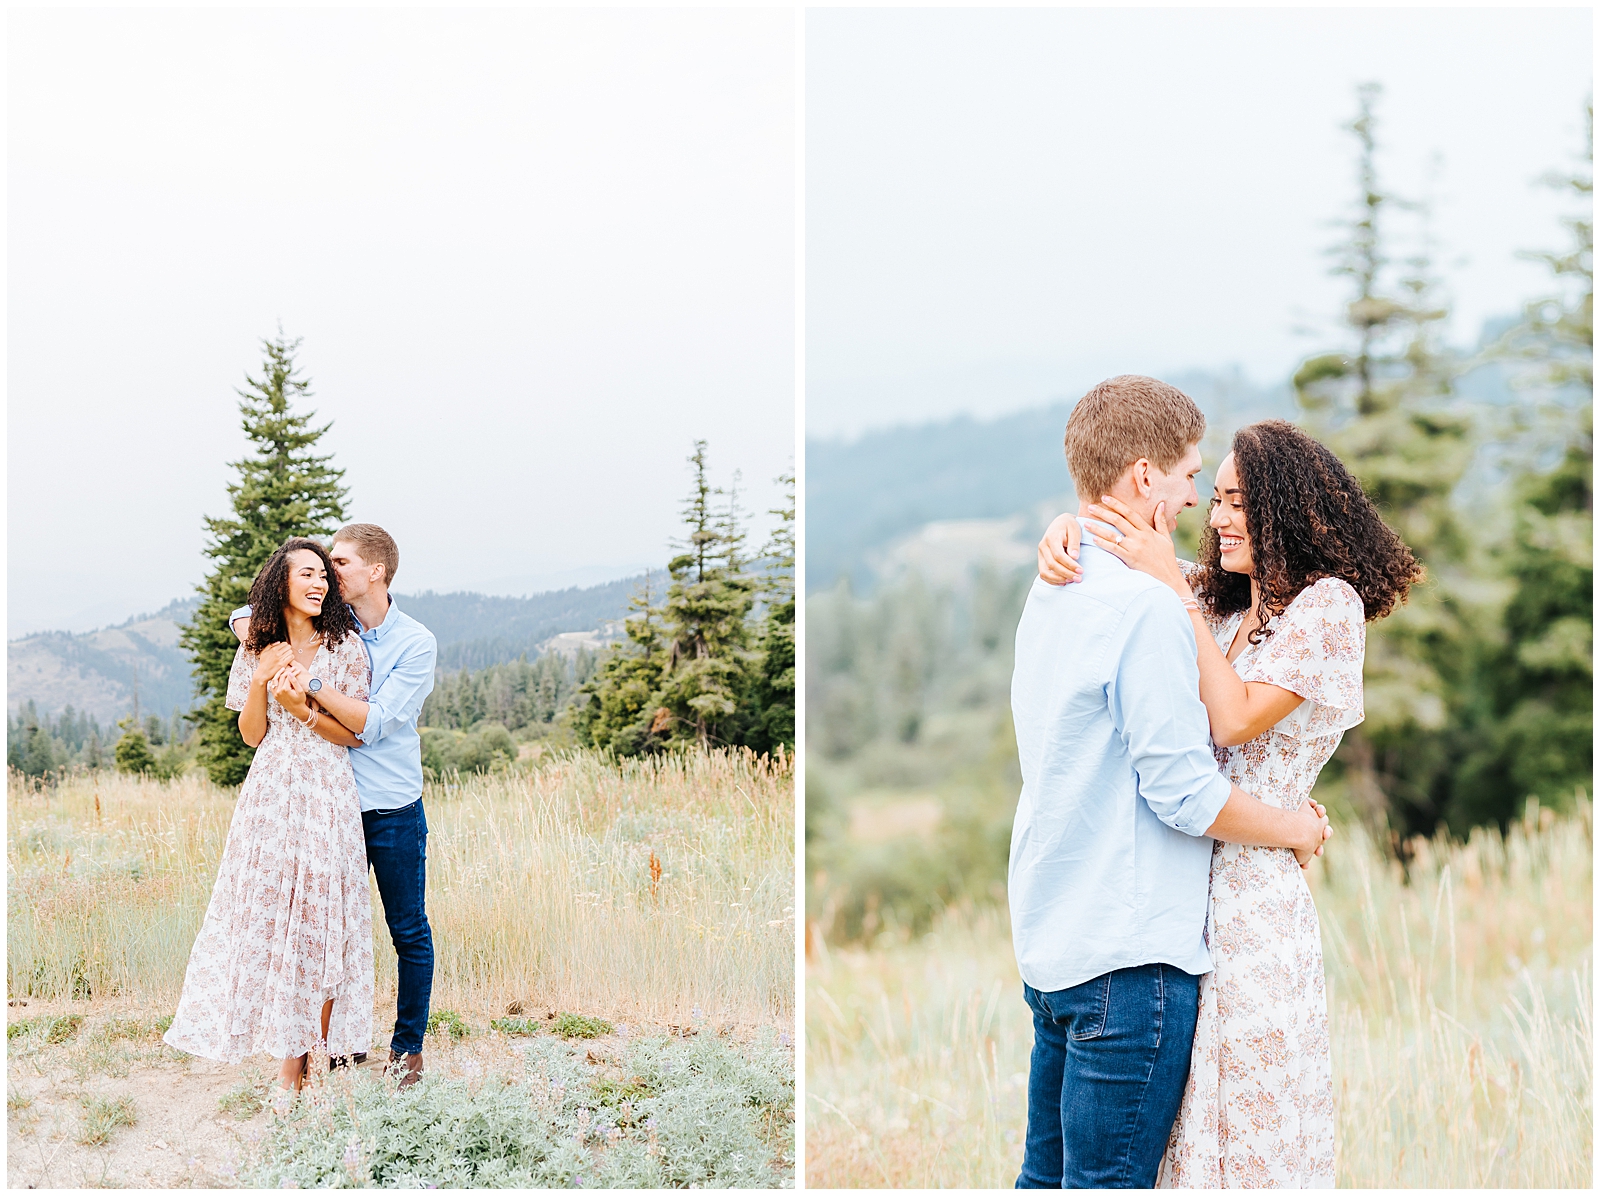 Summer Engagement Session in the Mountains - Bogus Basin